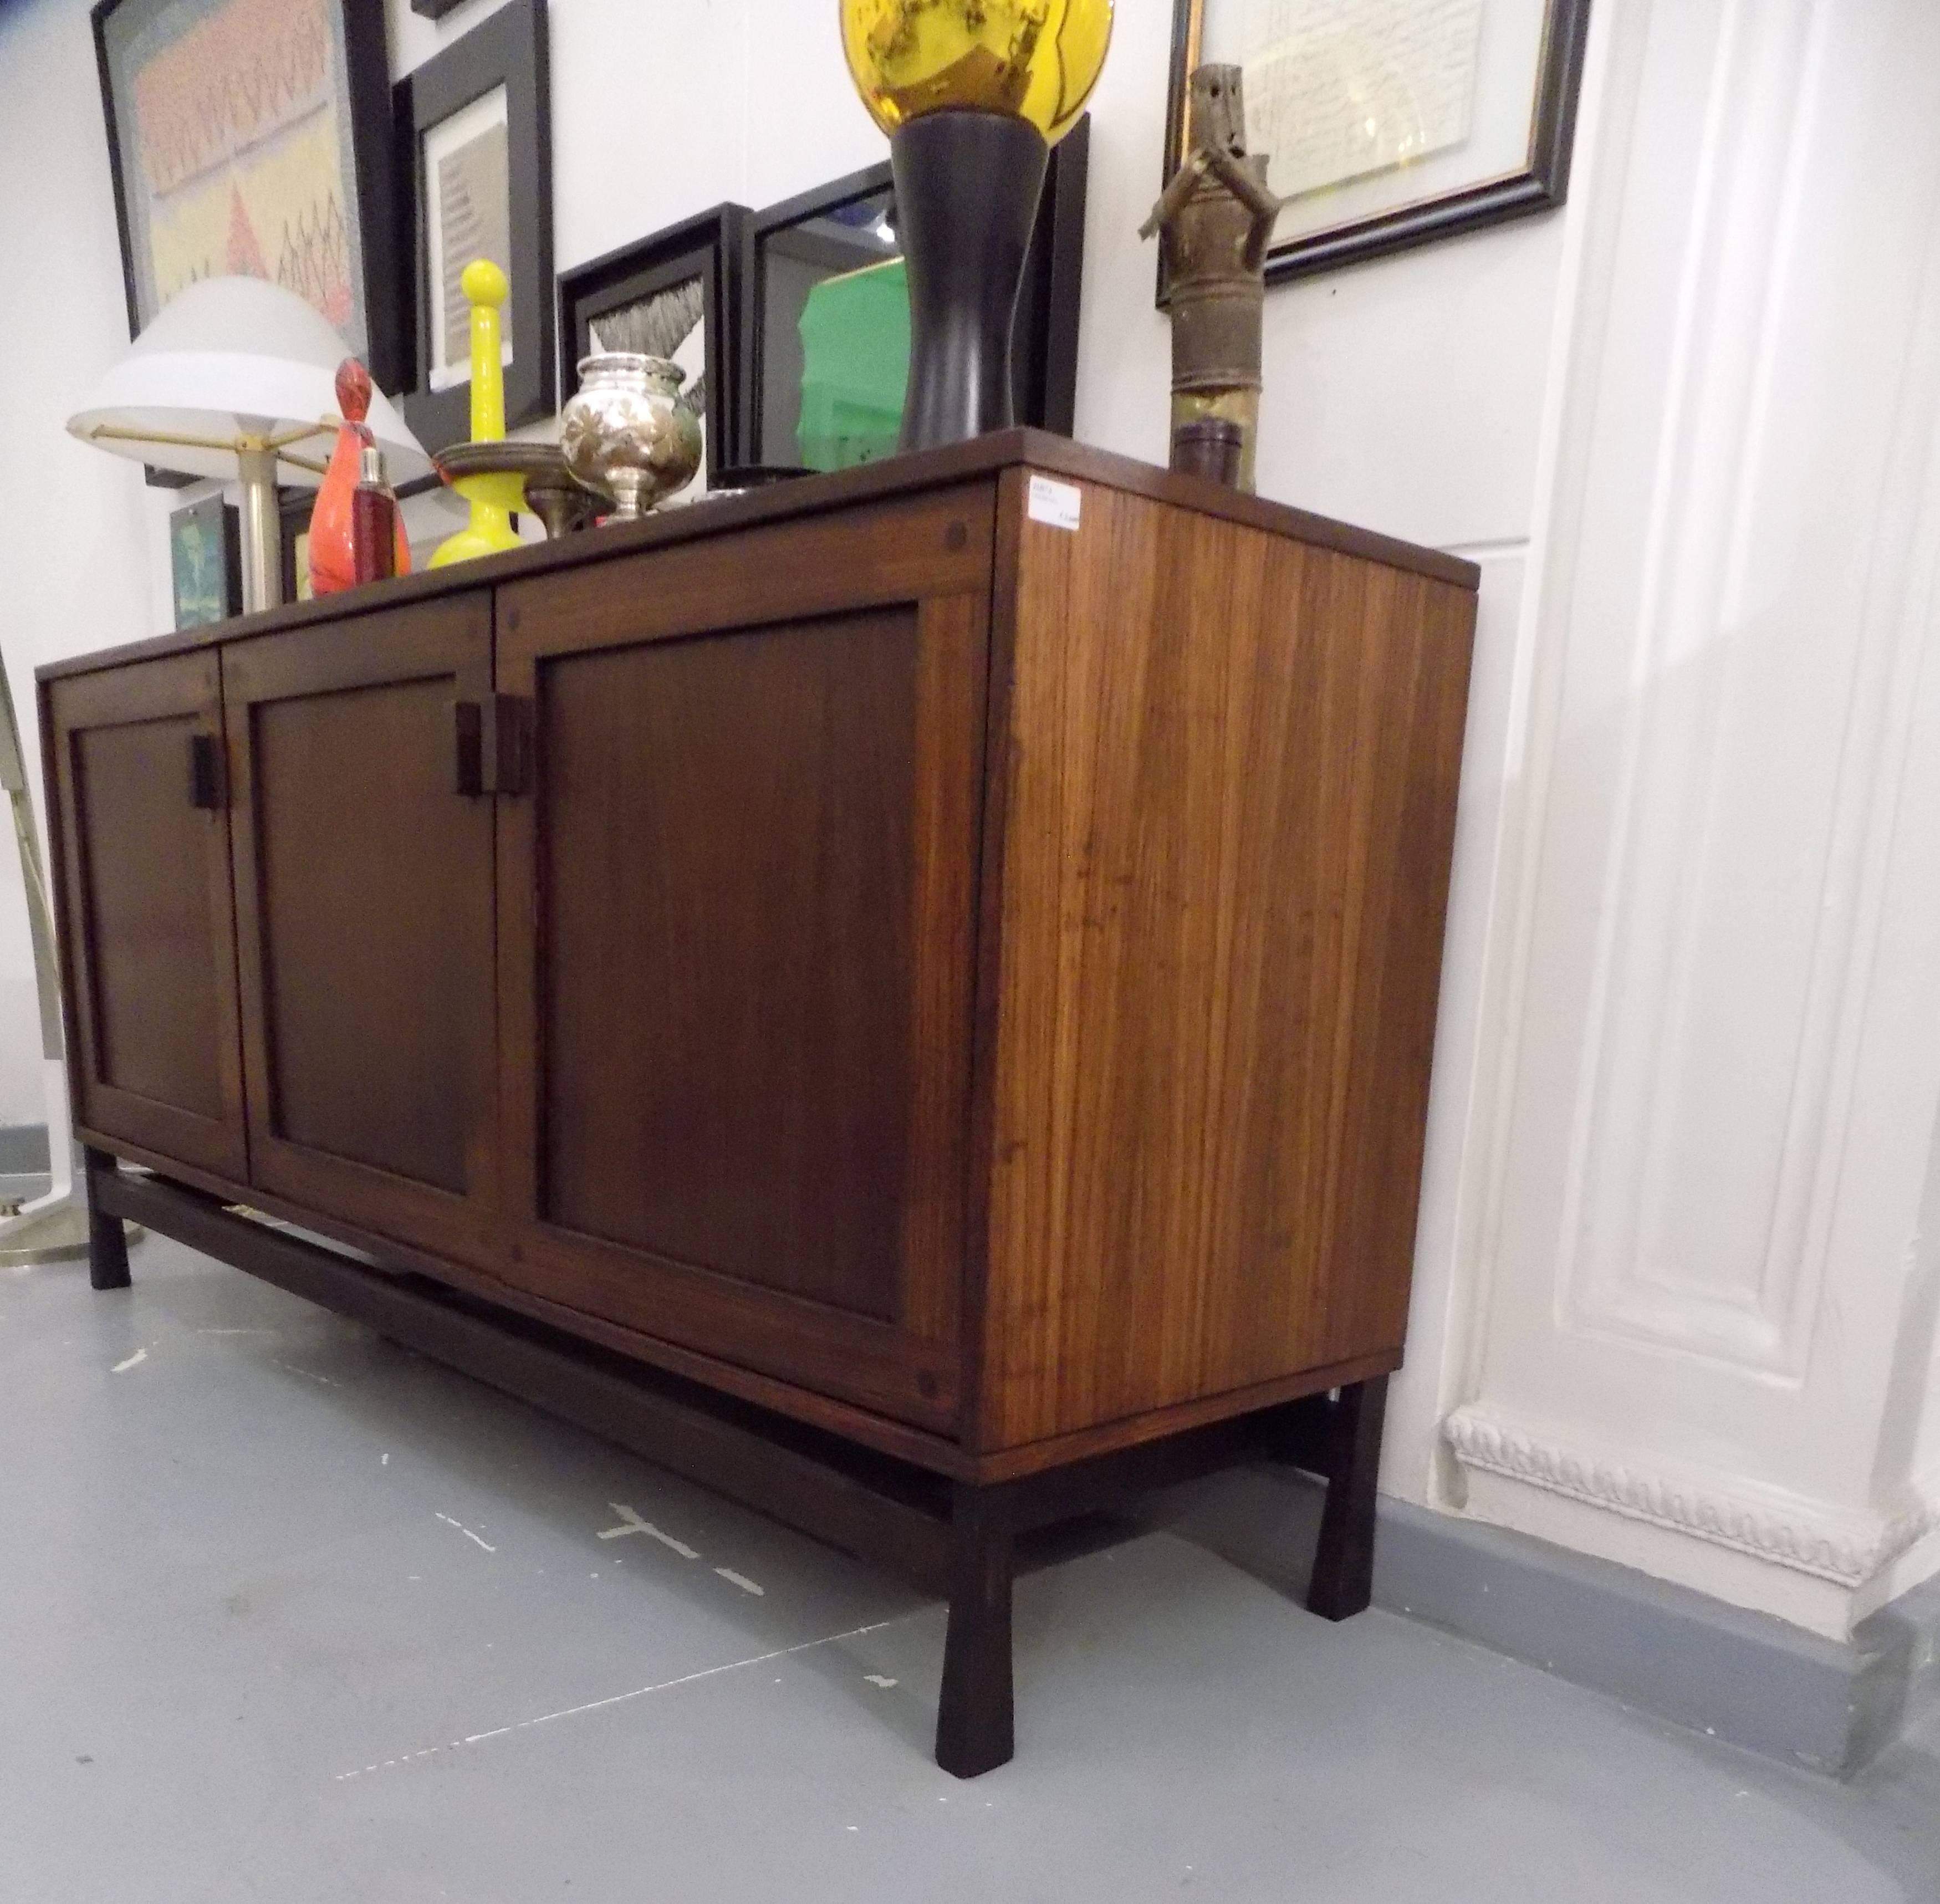 A stunning three-door credenza or sideboard with internal drawer unit with 3 pull-out service drawers.